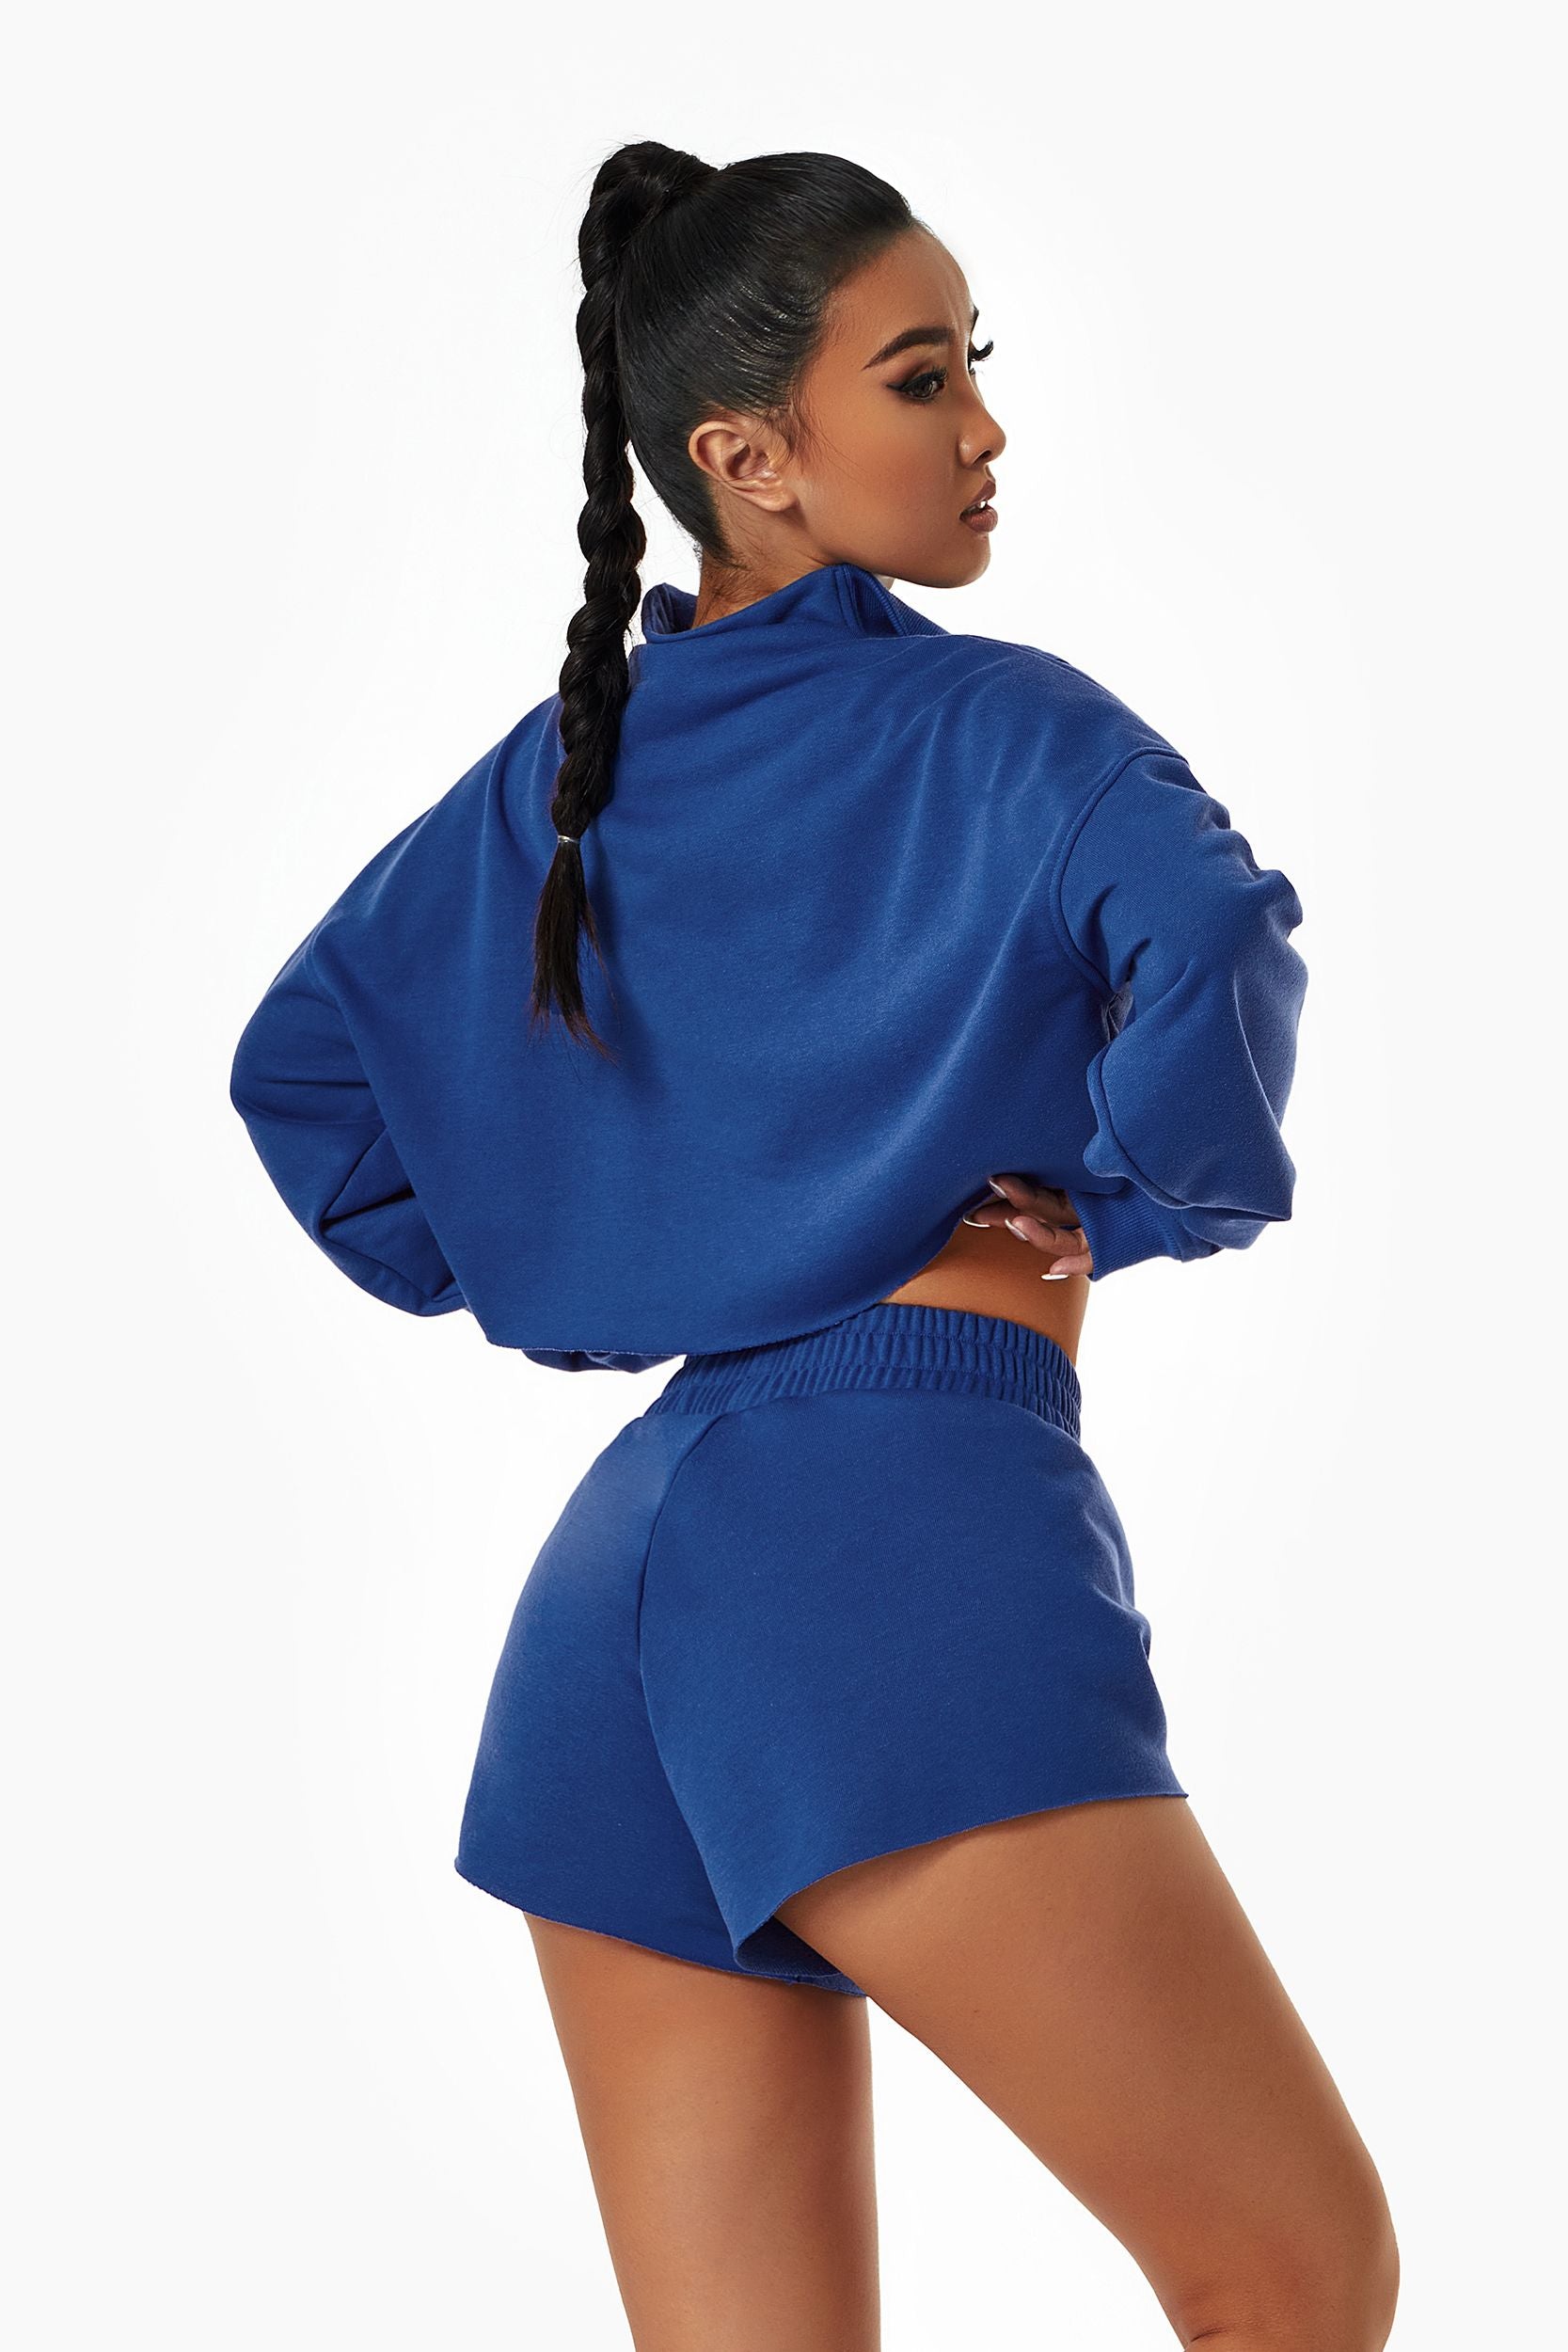 acelyn Womens Cute Sports 2 Piece Outfits Sweatsuit Baseball Short Sleeve  Zip Up Varsity Jacket Crop Tops Tennis Mini Skirt Sets Clubwear Blue S at   Women's Clothing store